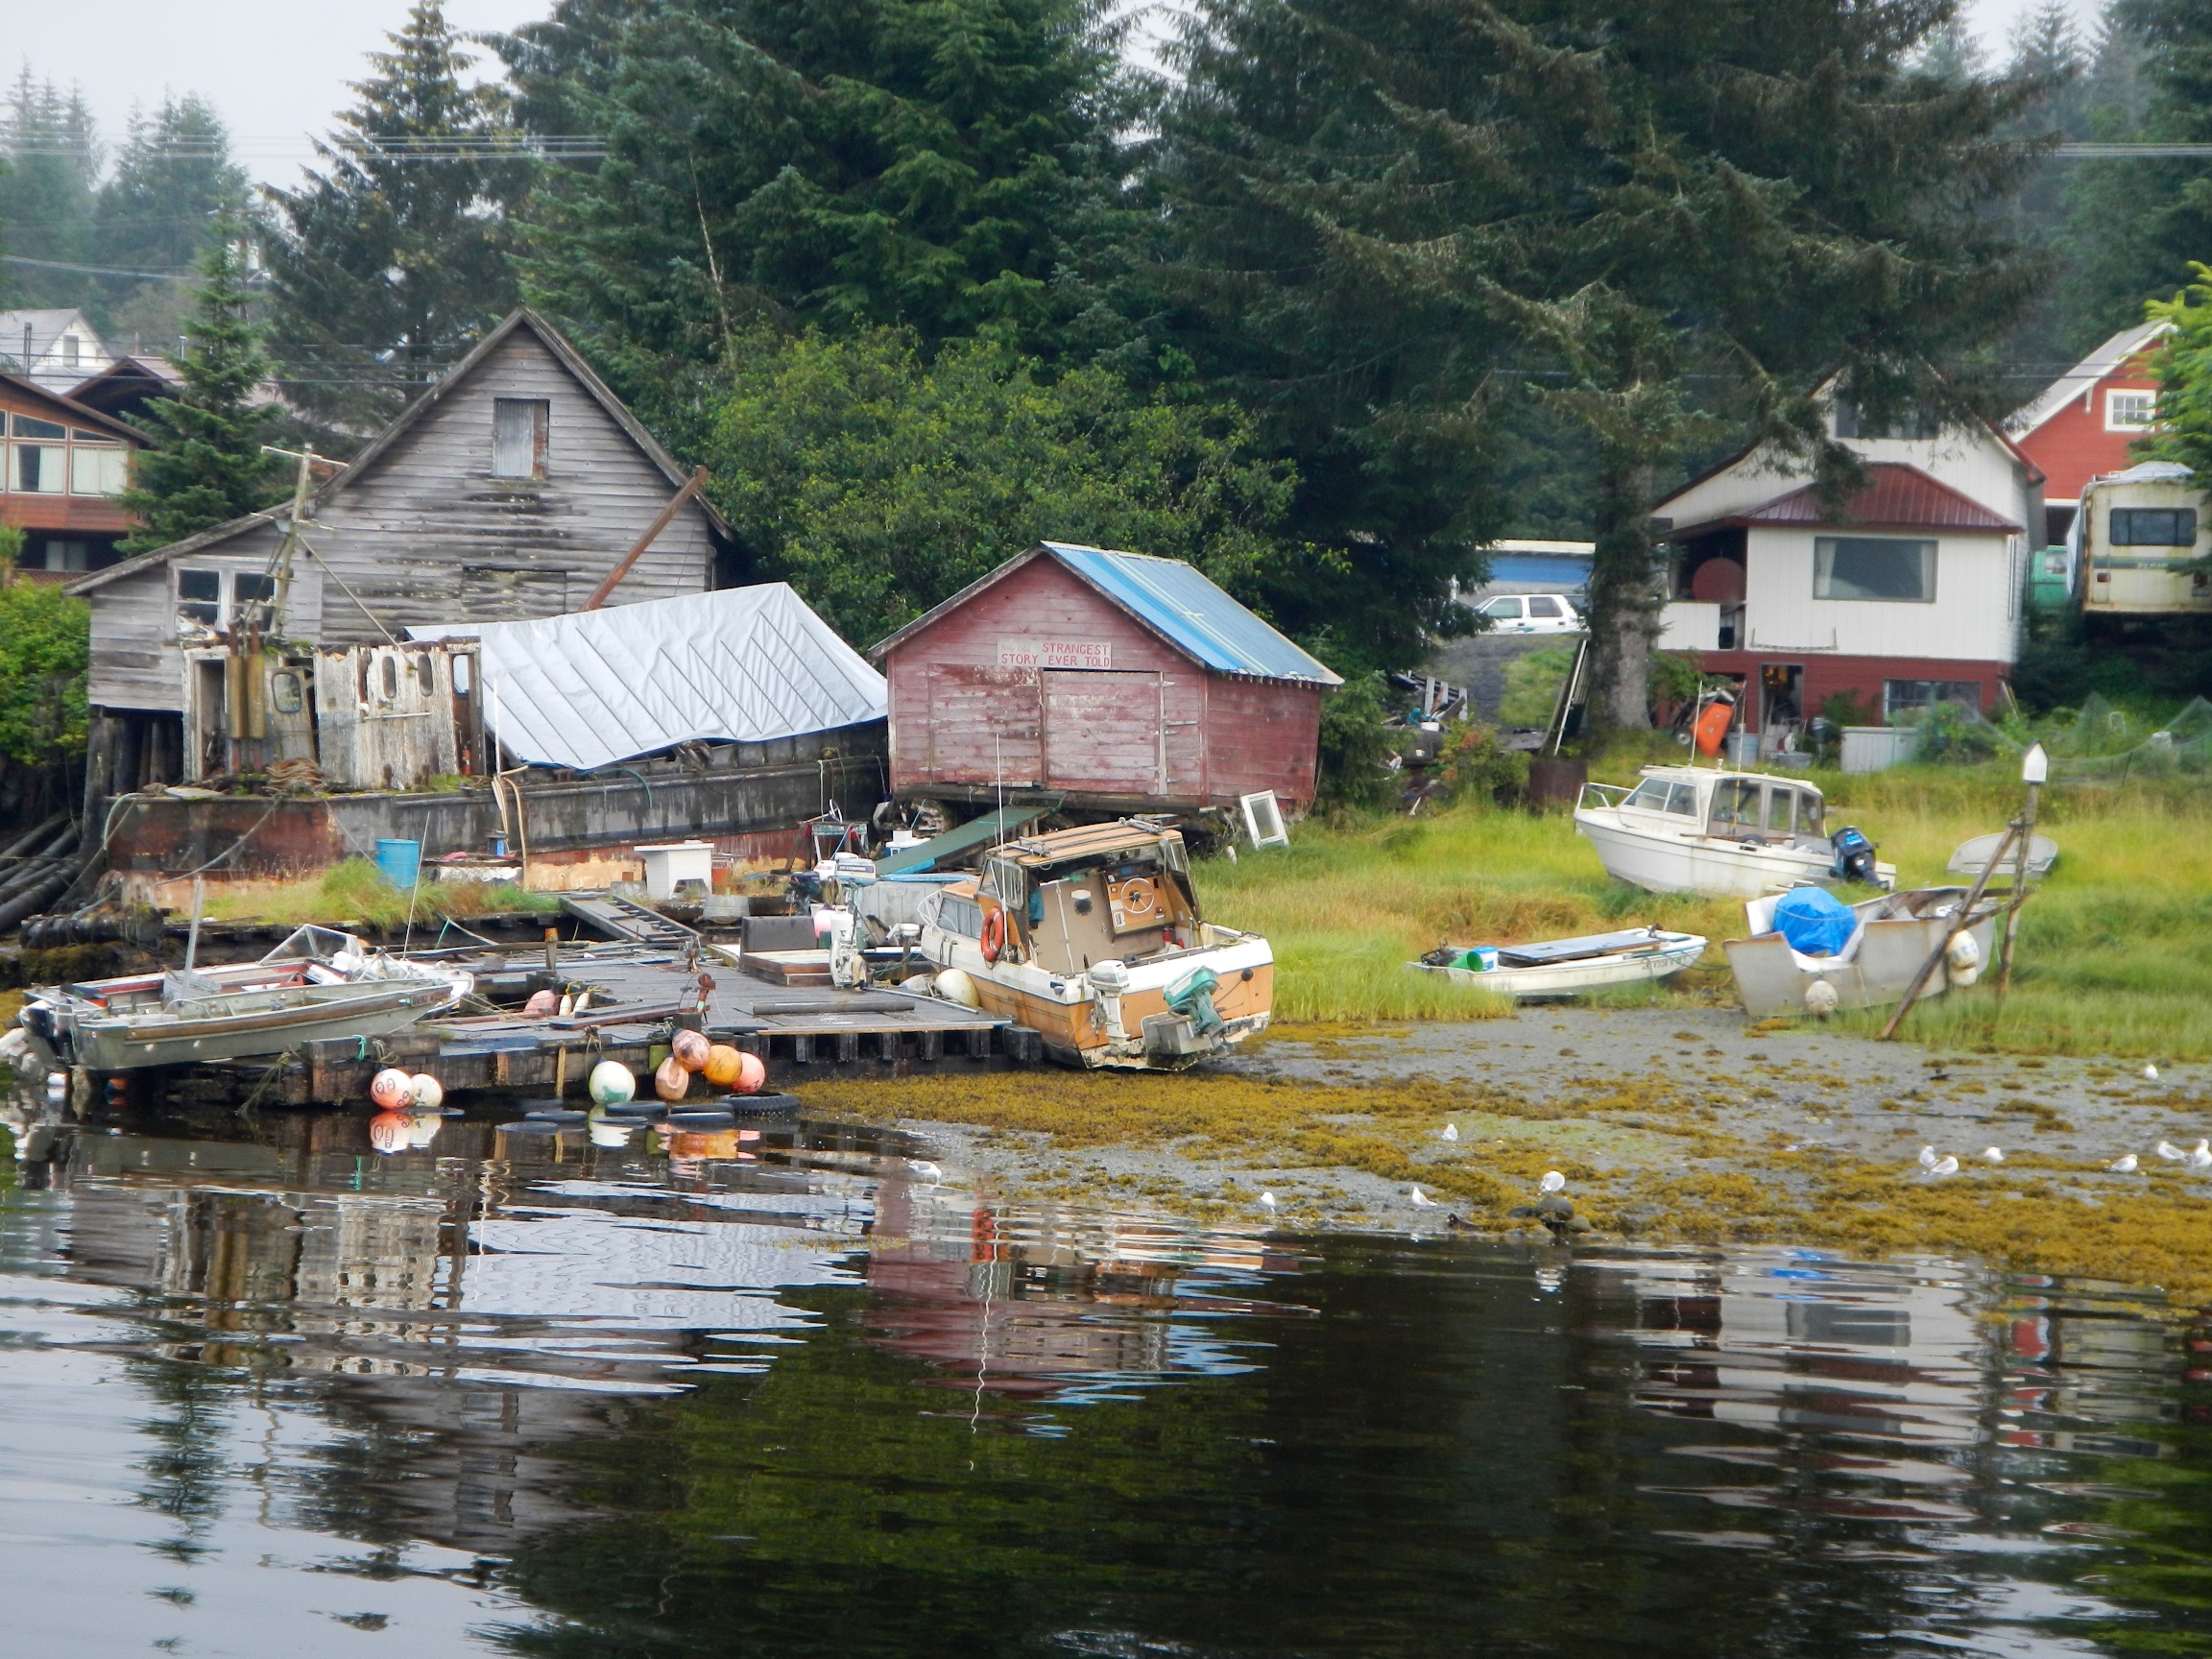  House at low tide later in the day, Petersburg, Alaska 